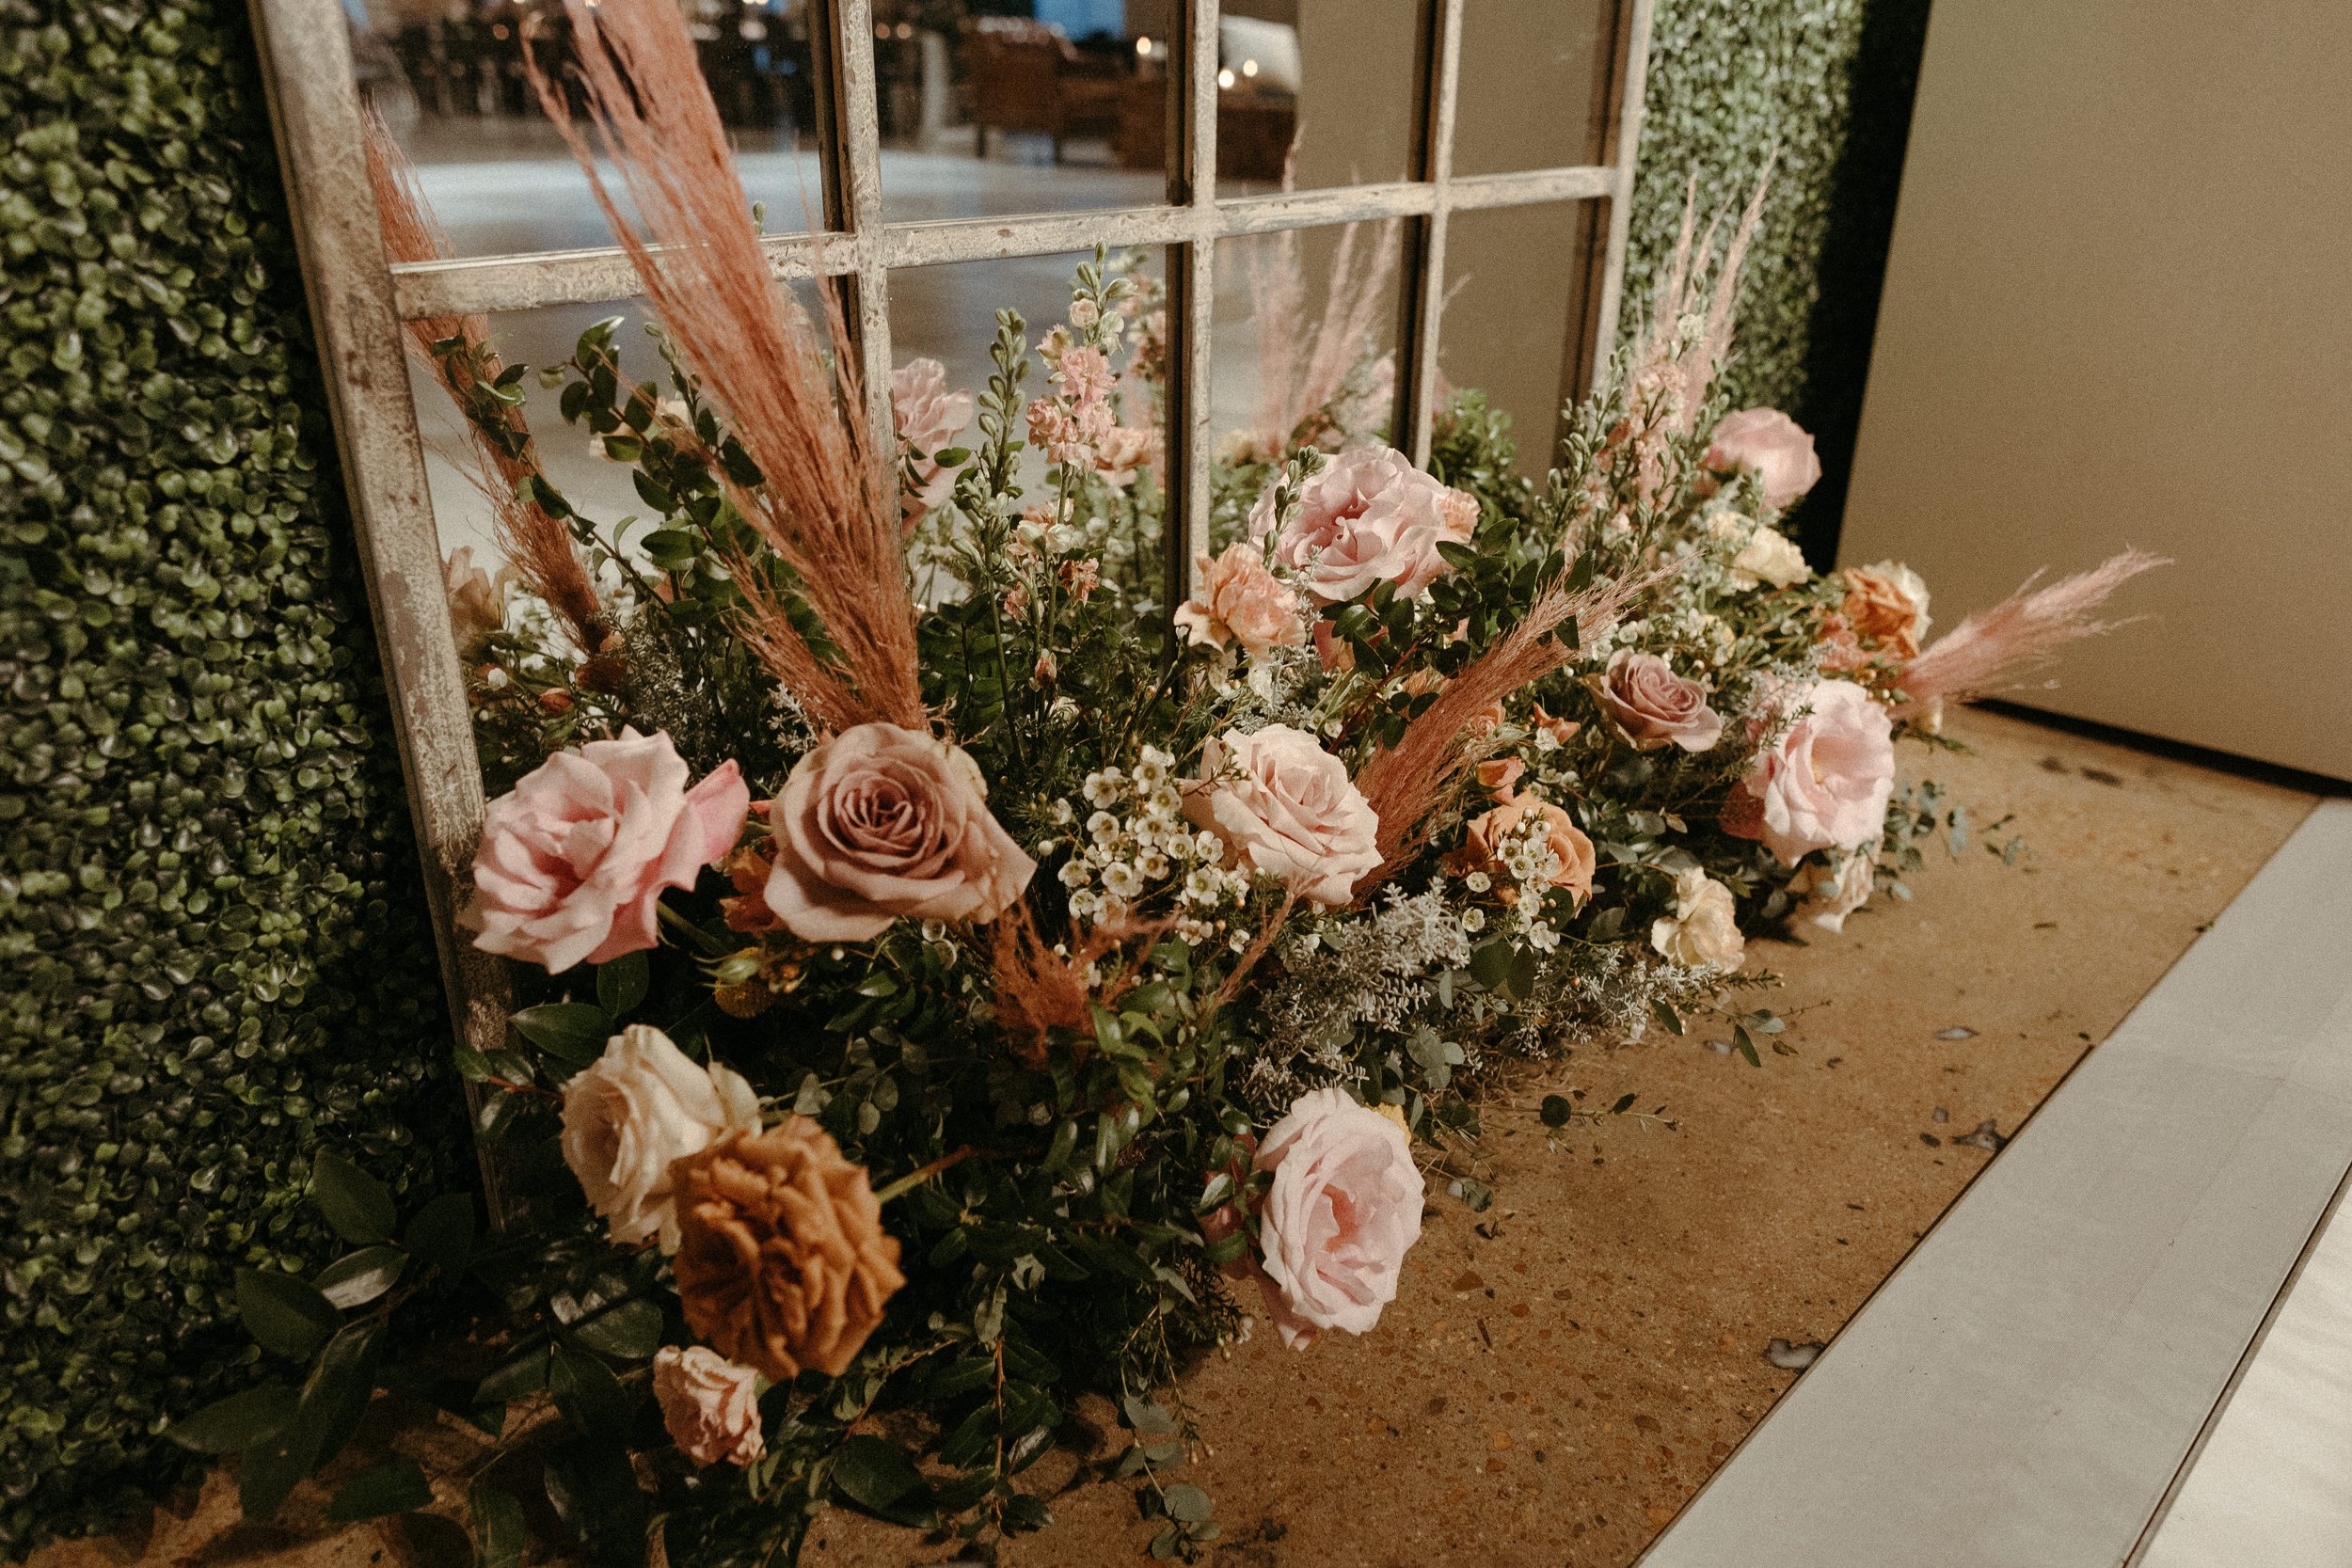 Stunning floral installations bring warmth to this Great Gatsby inspired wedding with florals of terra cotta, dusty pink, and burgundy hues. Petal heavy roses, wisteria, copper beech, and pink pampas grass accents. Designed by Rosemary and Finch in N